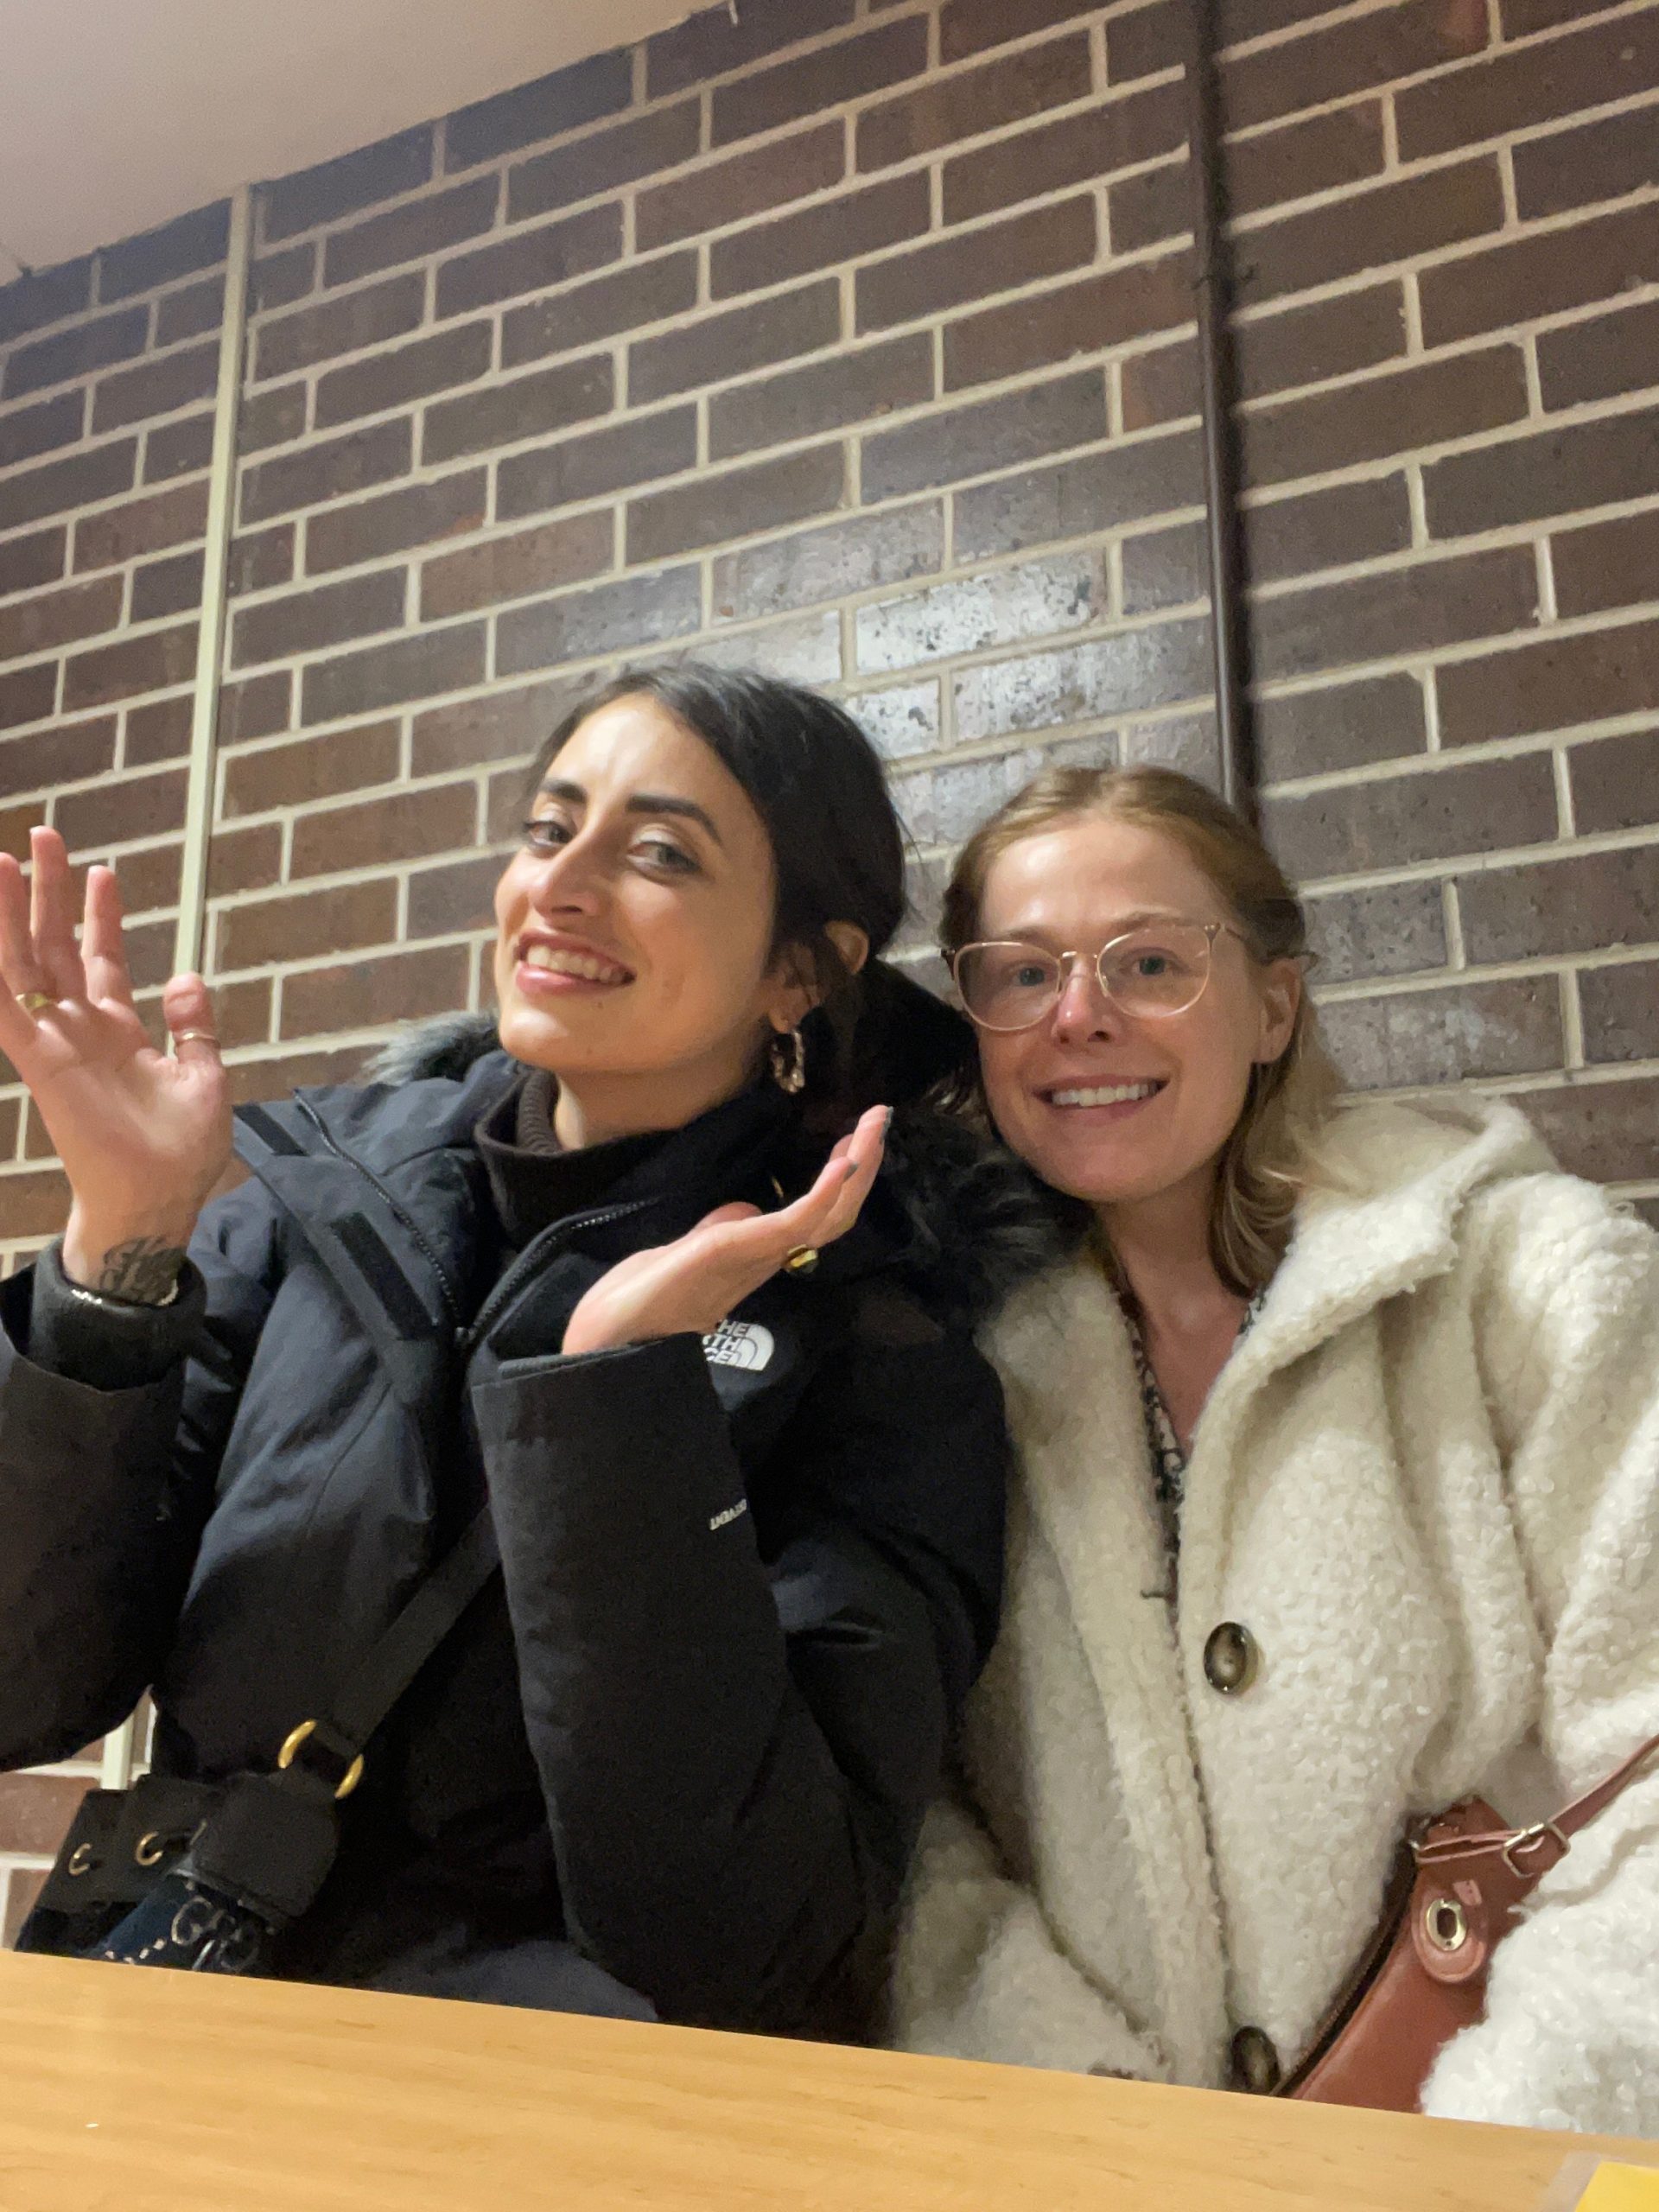 Emily Boullear and Christina Hake, co-founders of Free Thought, two young white women, one with black hair in a black jacket, one with blonde hair in a white jacket